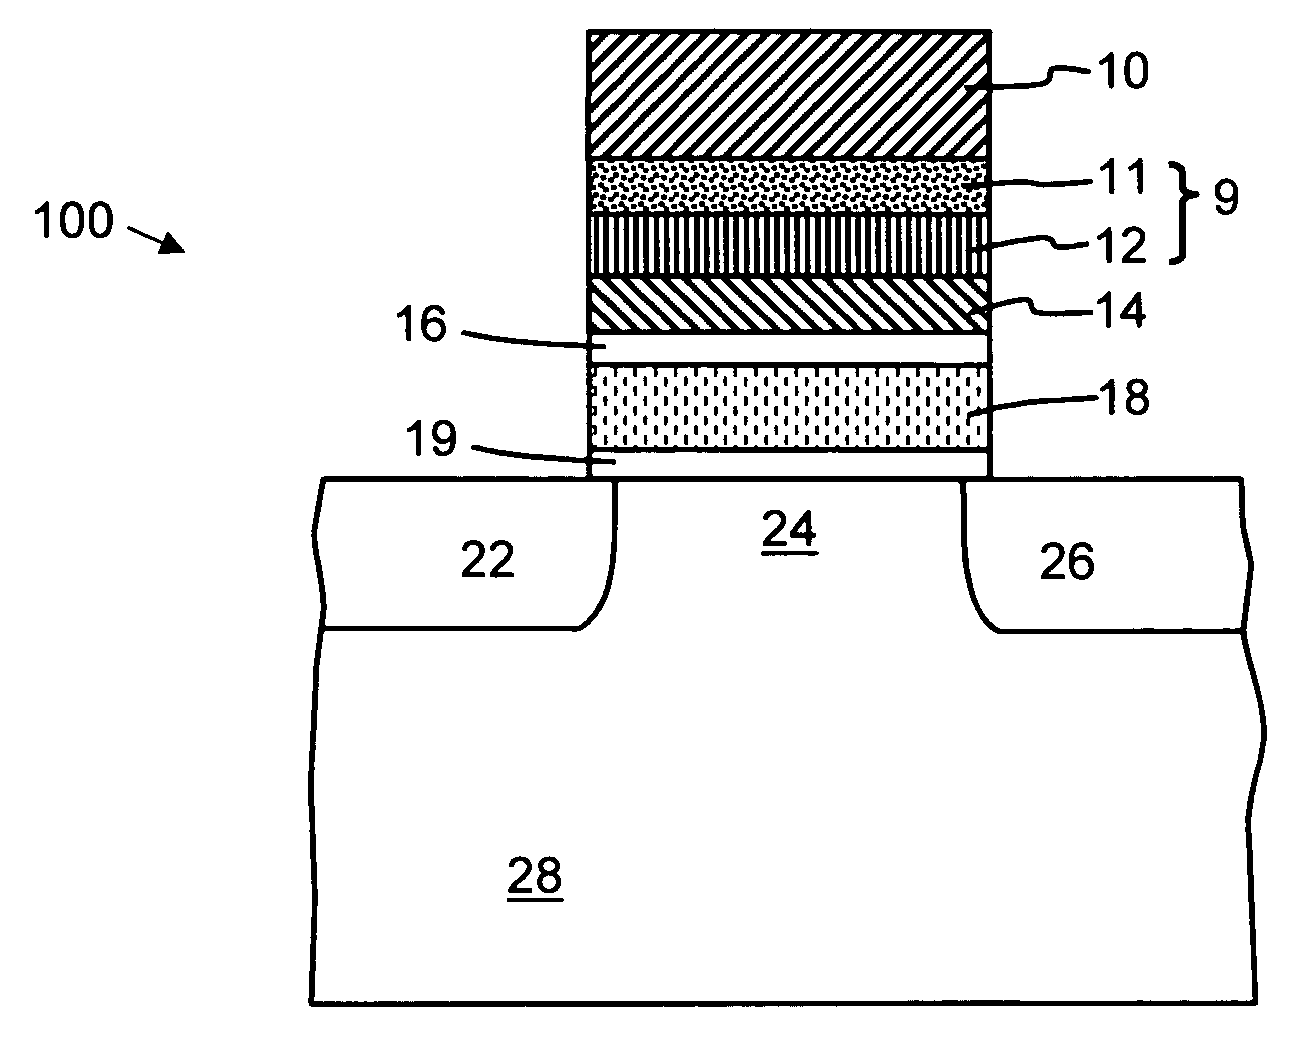 Electrically alterable memory cell